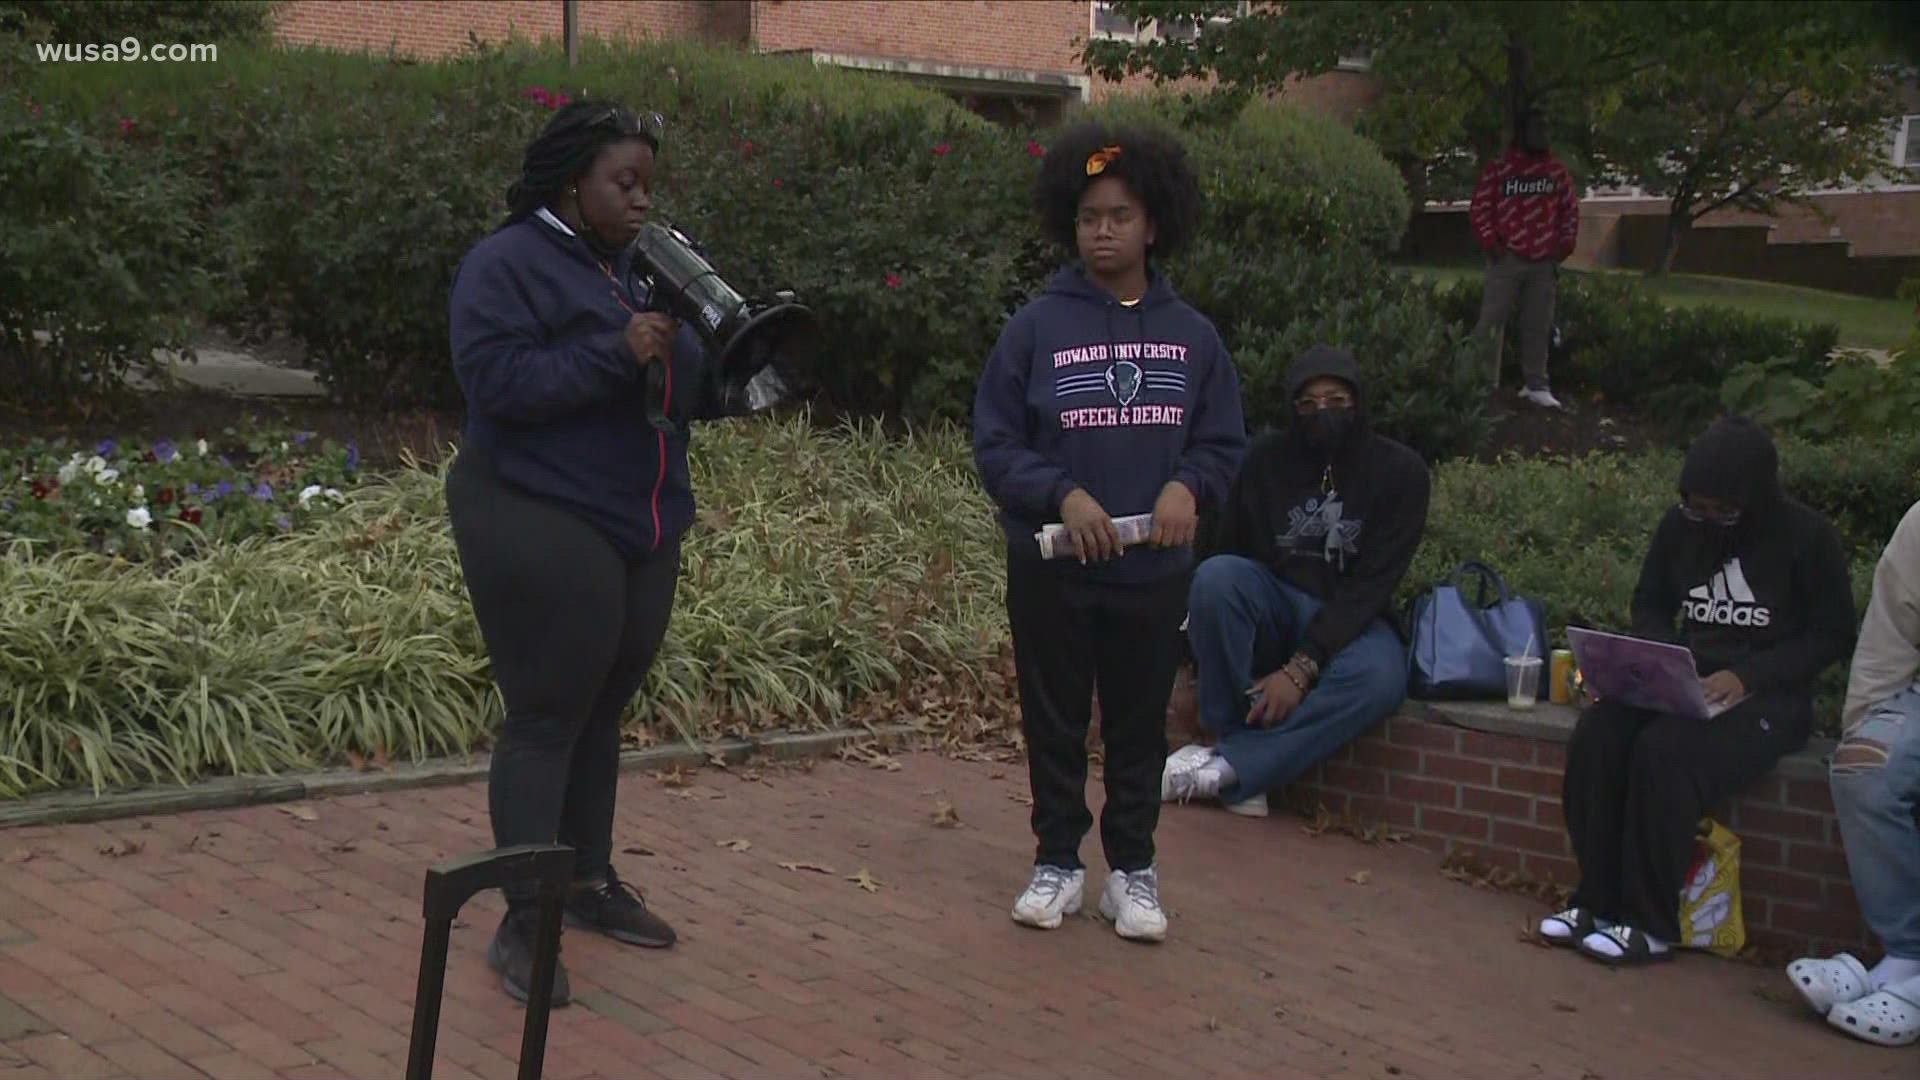 Student demonstrators are demanding representation on the university's board of trustees, and want something to be done to address housing conditions.